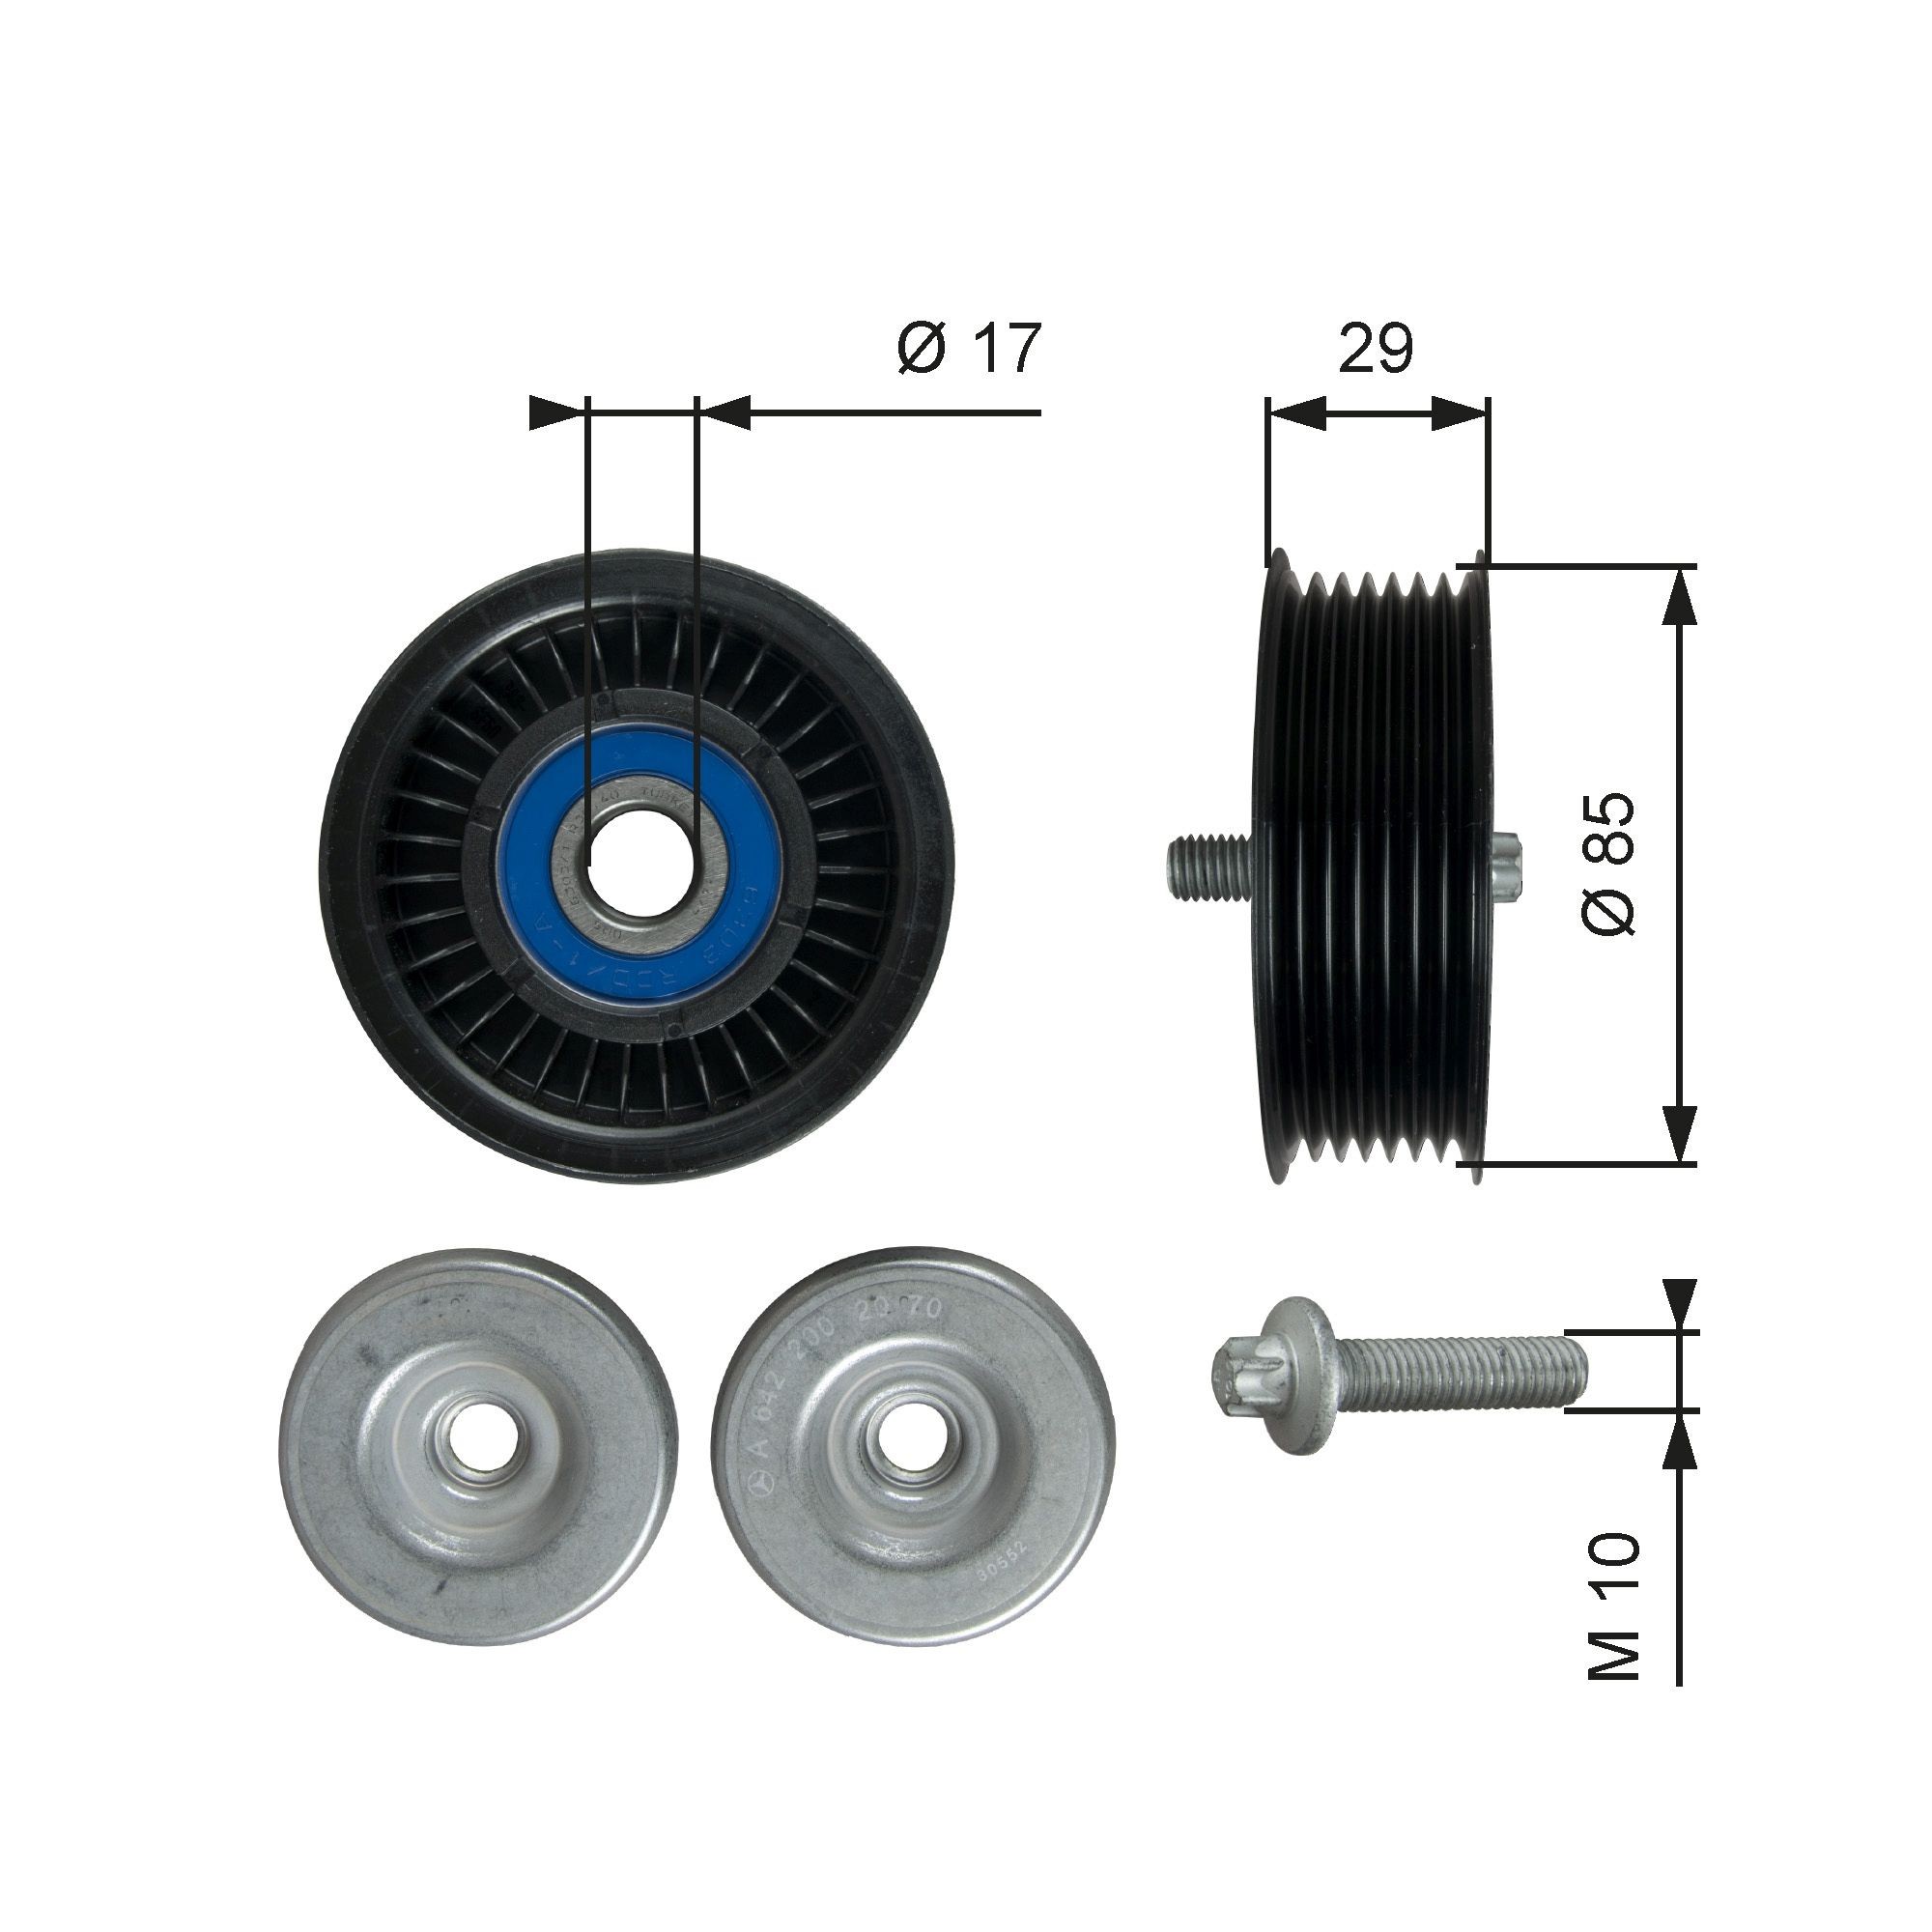 GATES Deflection guide pulley v ribbed belt MERCEDES-BENZ E-Class T-modell (S213) new T36765